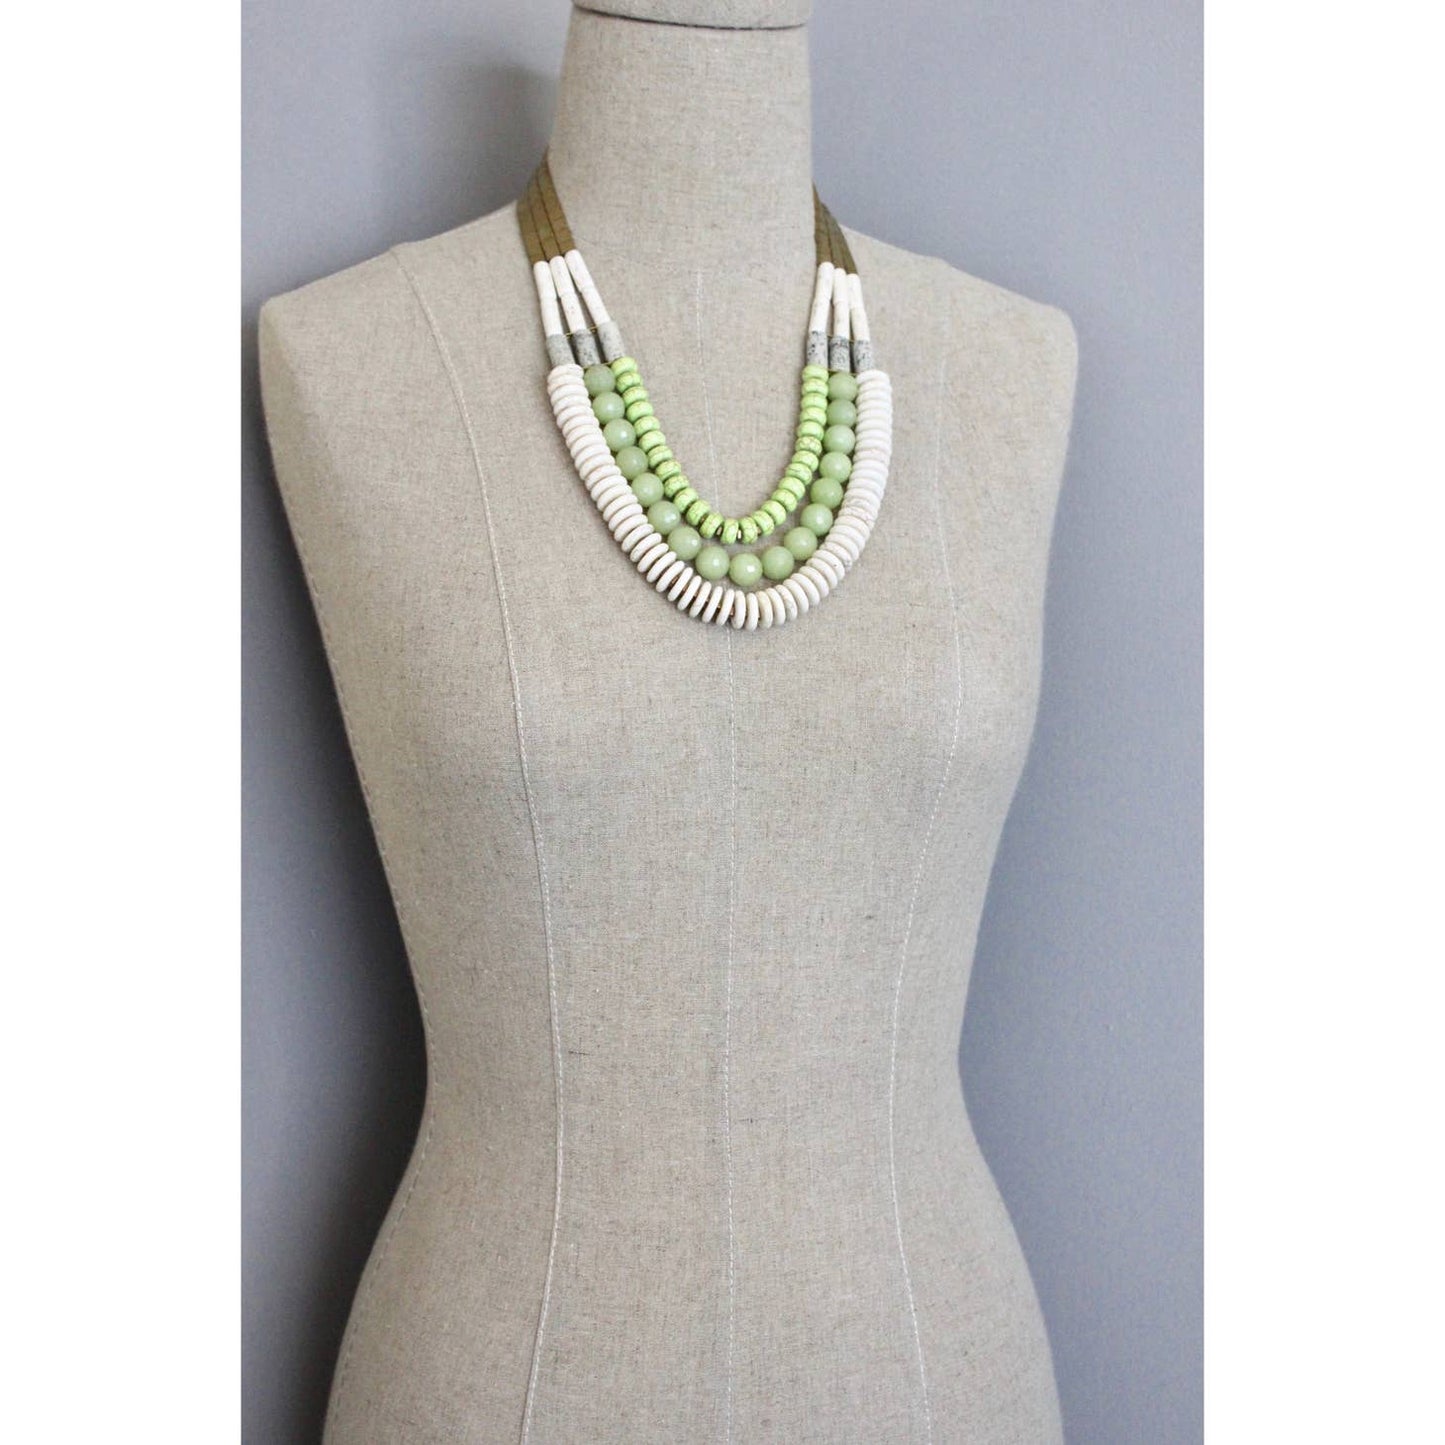 Triple Strand Necklace w/ Lime Green and White Beads